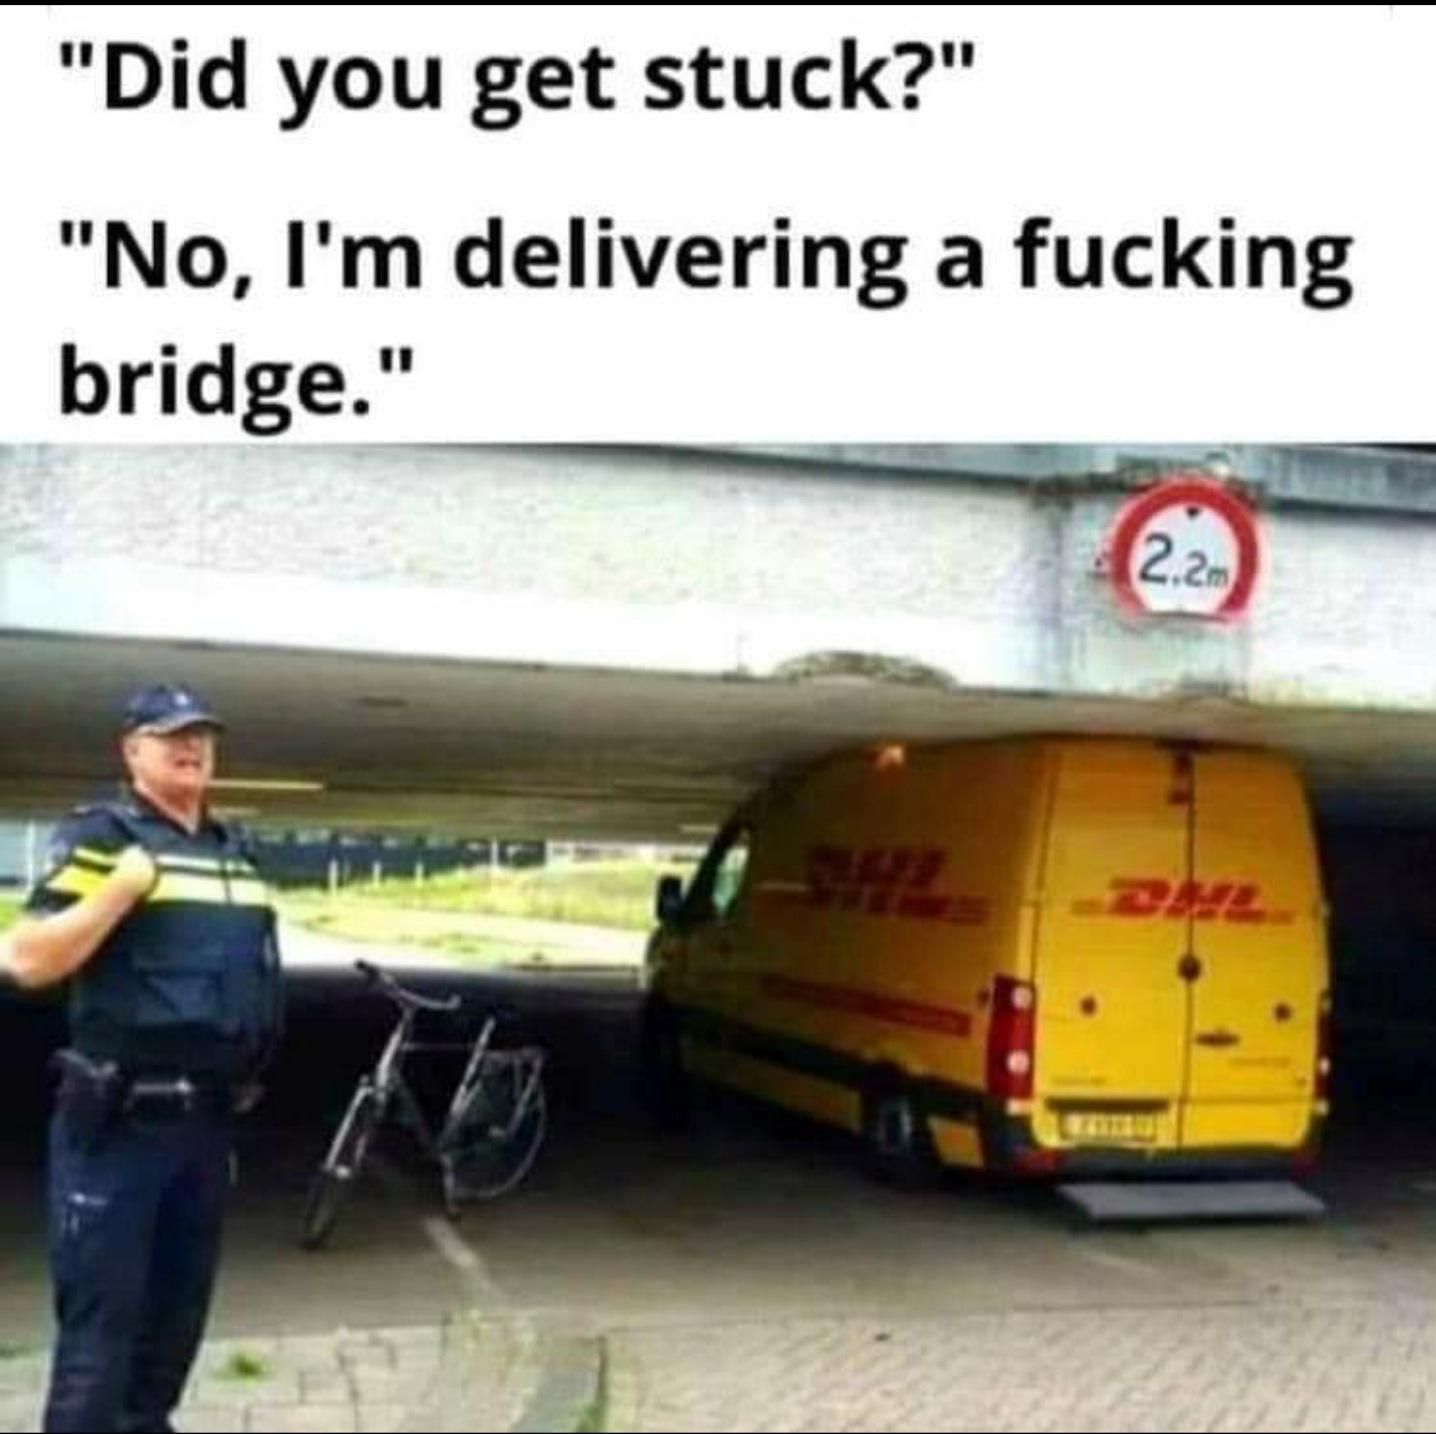 This makes me giggle, lots of people hit the bridge in my city with vans and lorries so I posted this haha